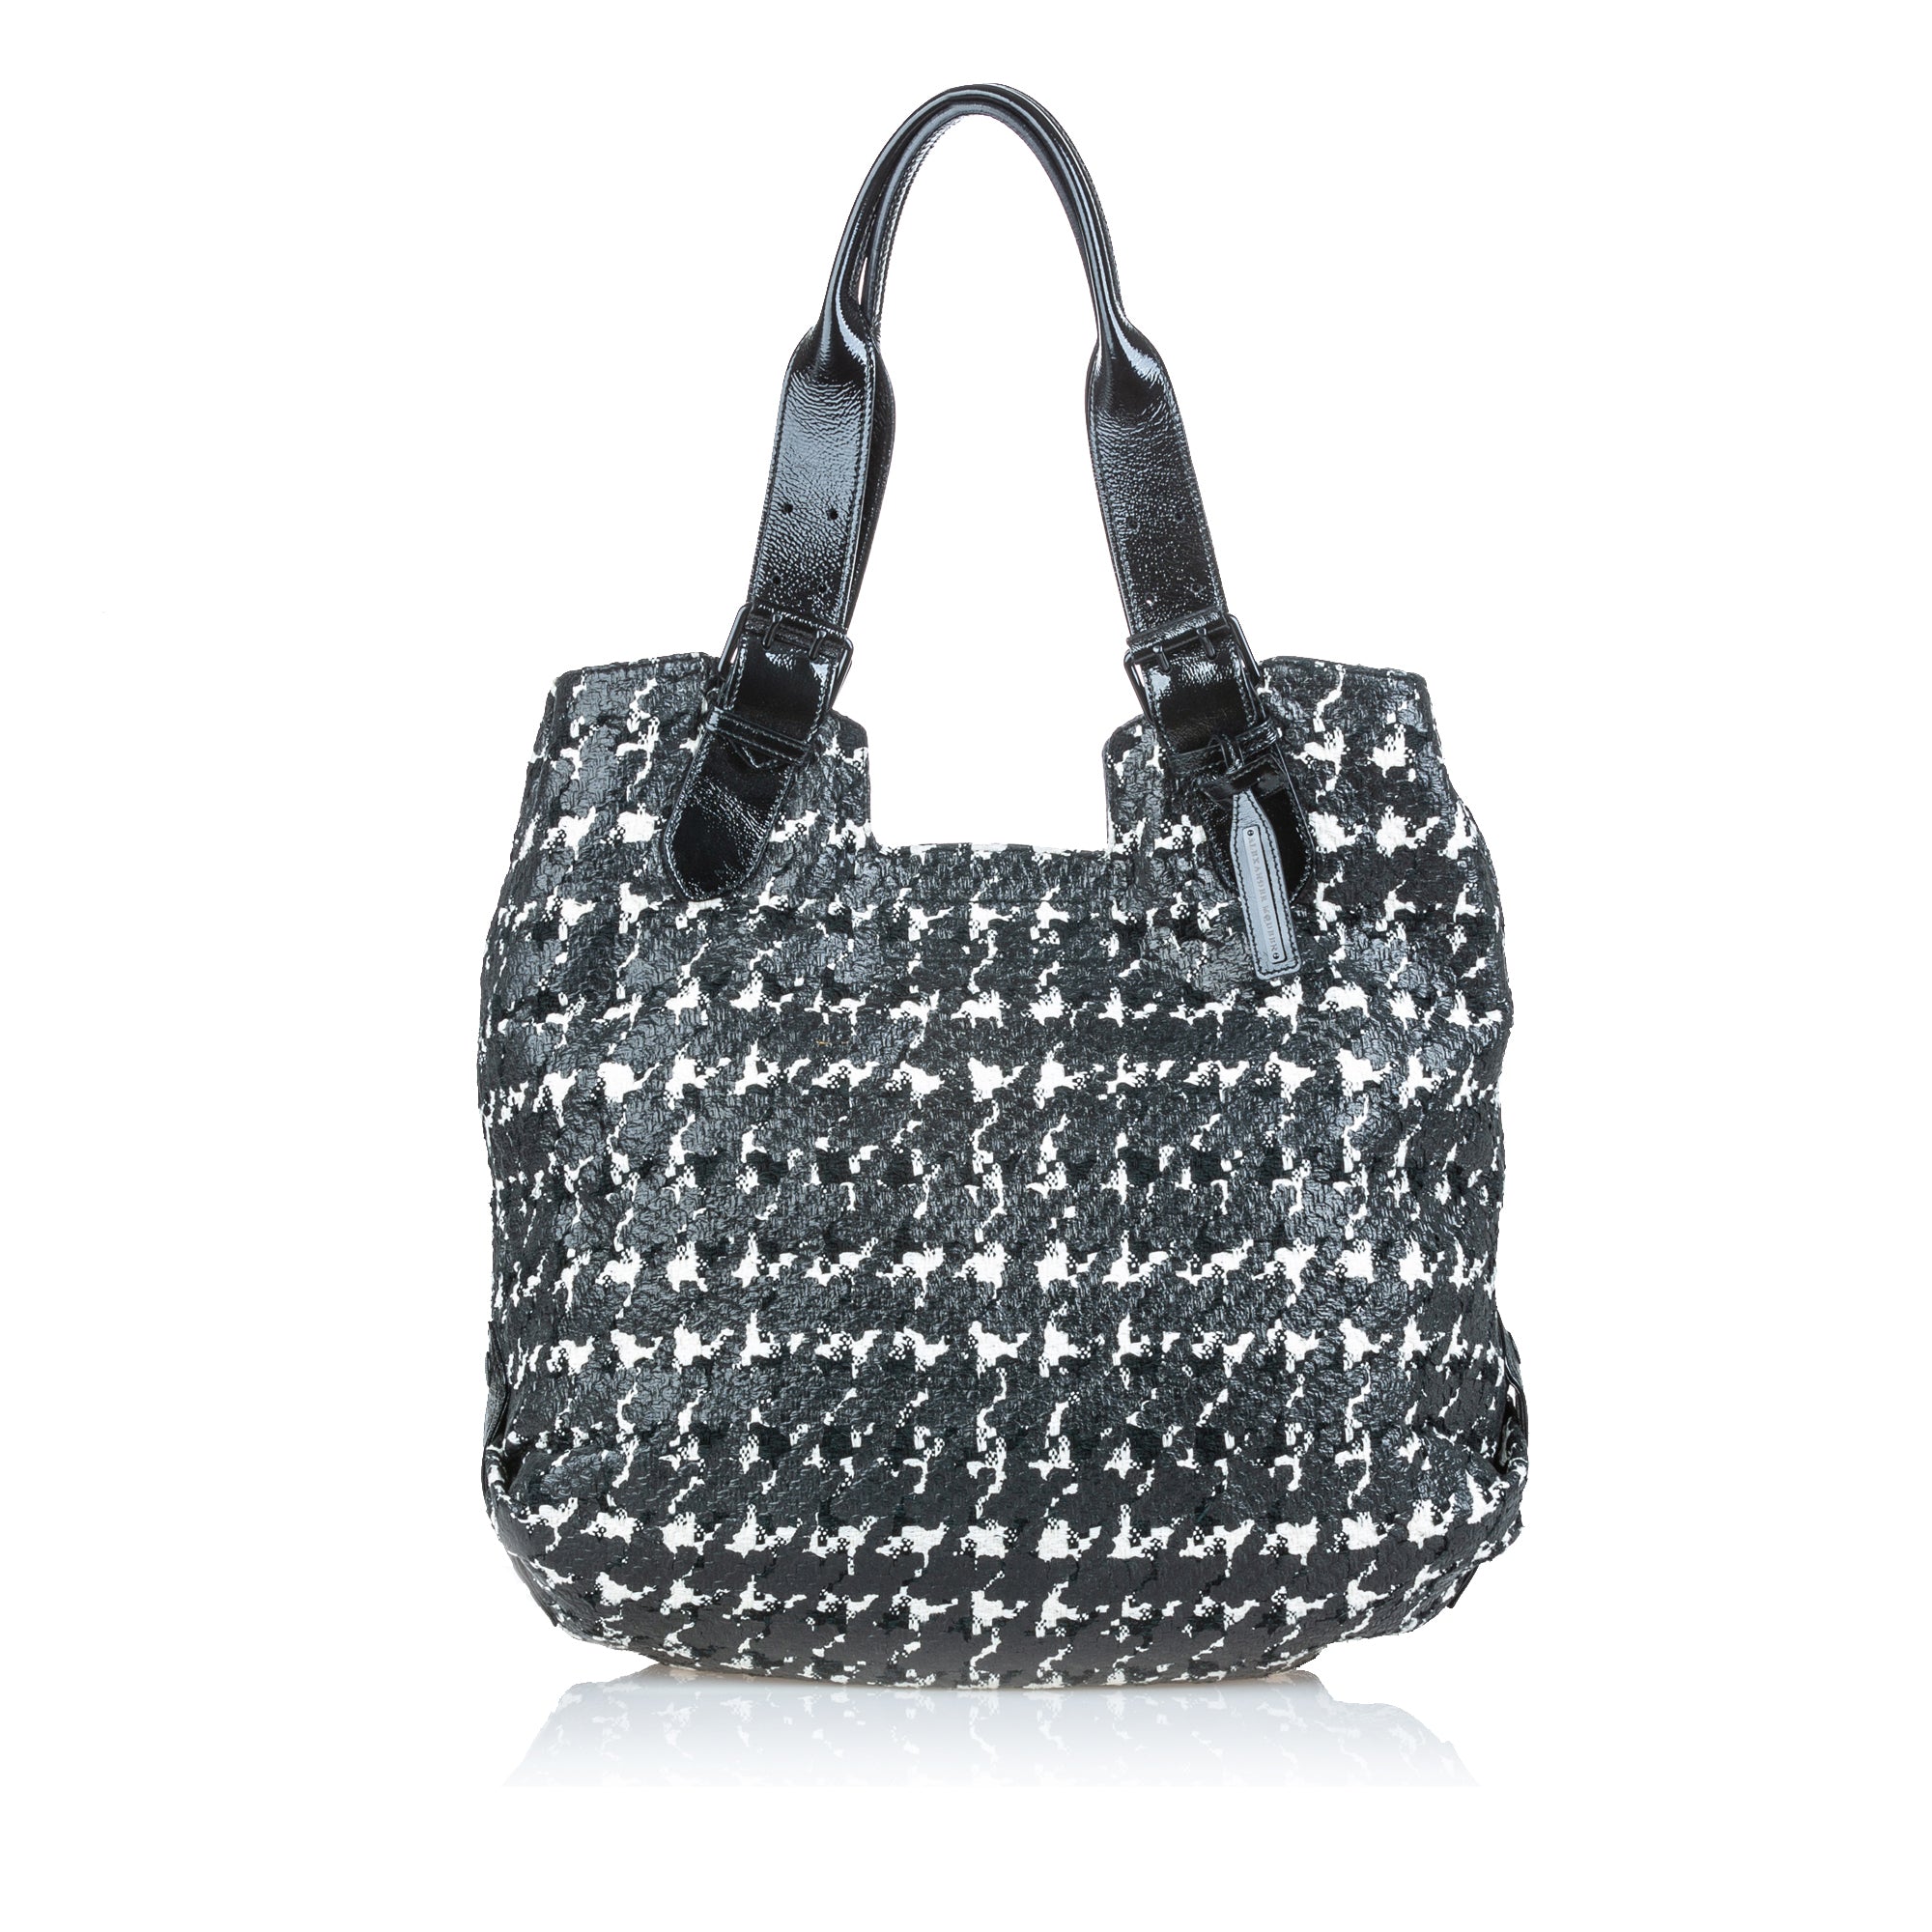 Buy & Consign Authentic Alexander Mcqueen Houndstooth Leather Tote Bag at The Plush Posh